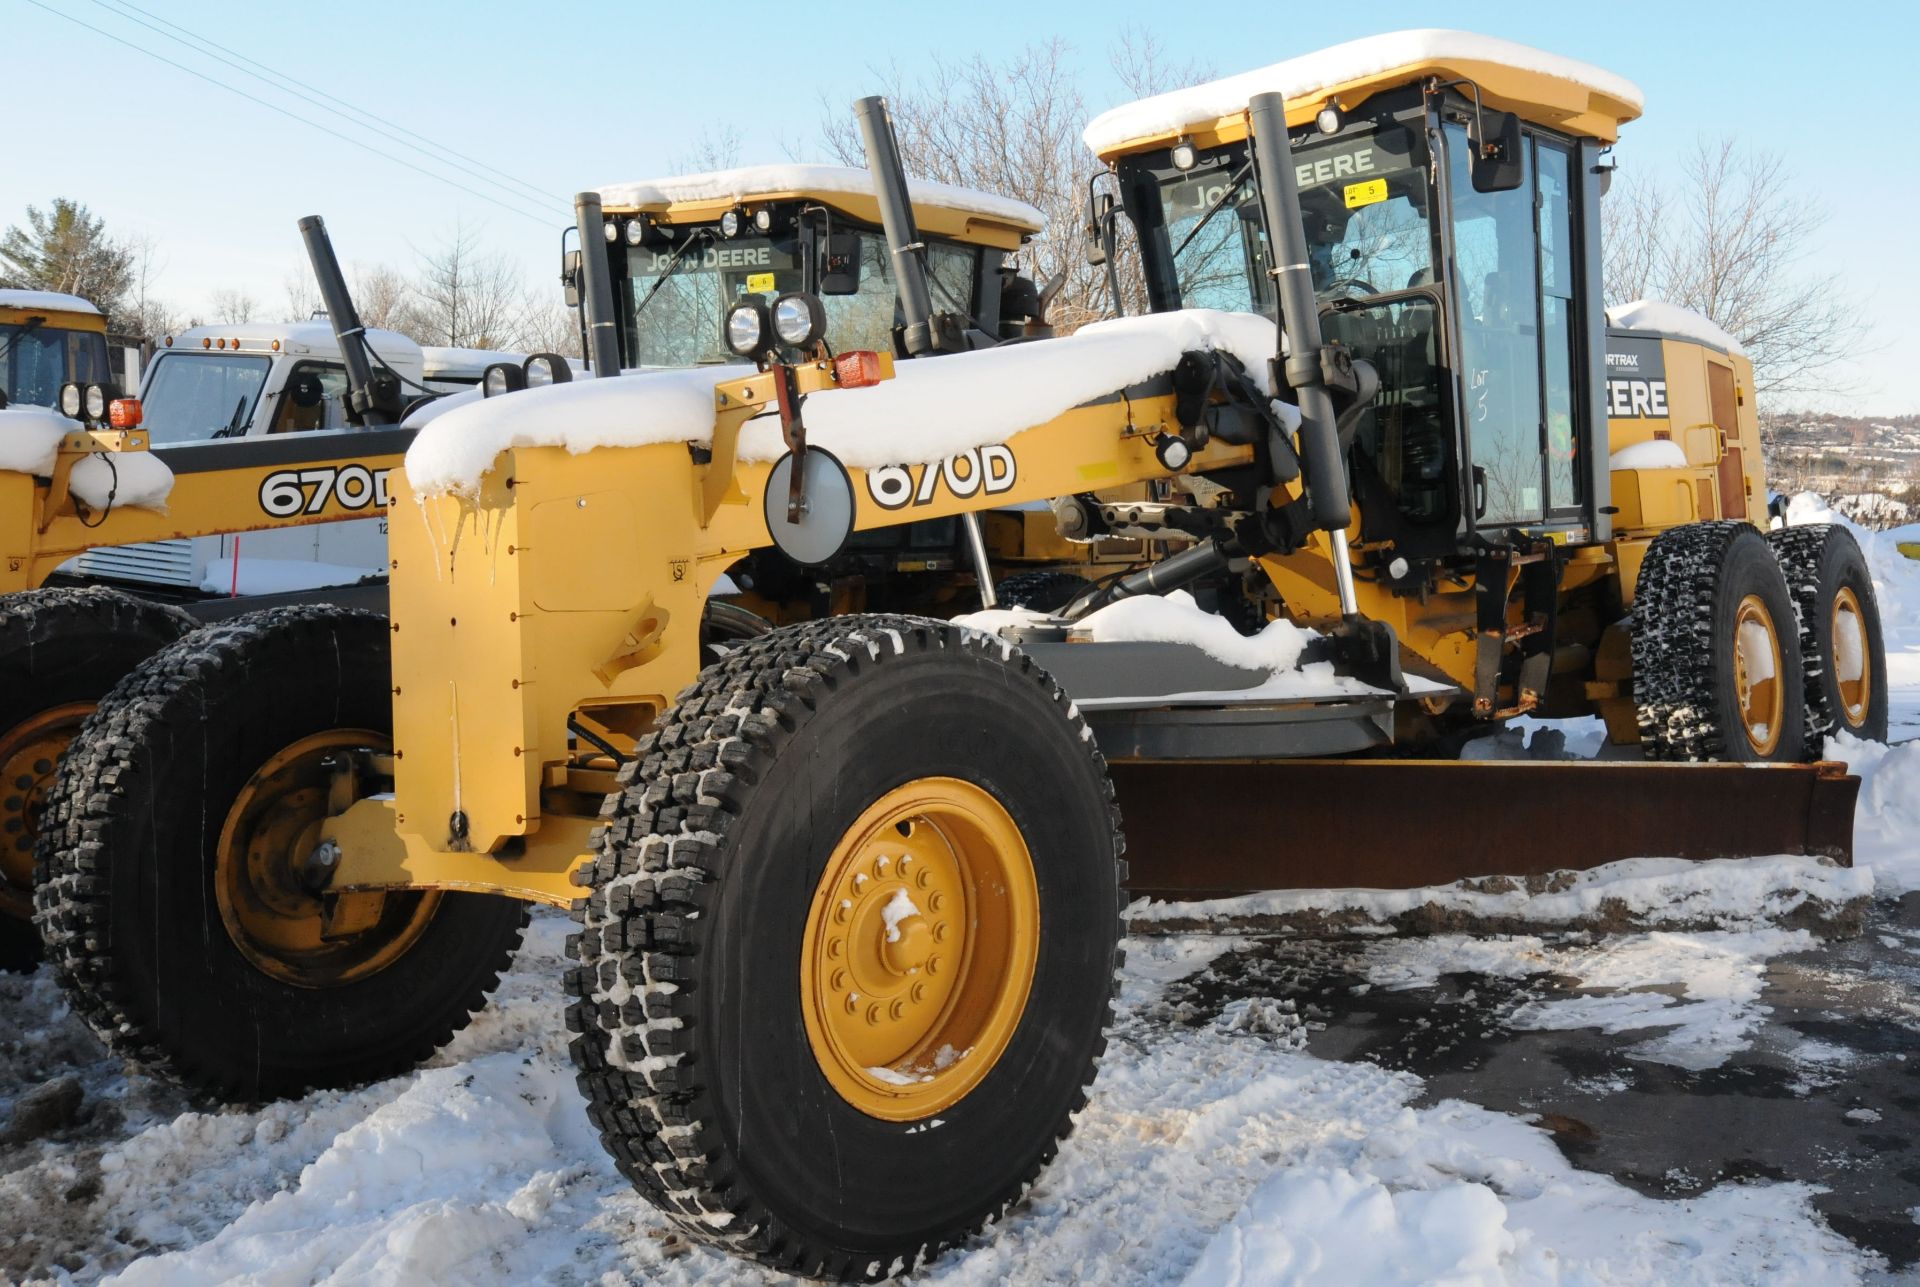 JOHN DEERE (DELIVERED BY NORTRAX IN 2012, MFG YEAR 2007) 670D MOTOR GRADER, APPROX. 1,910 HRS